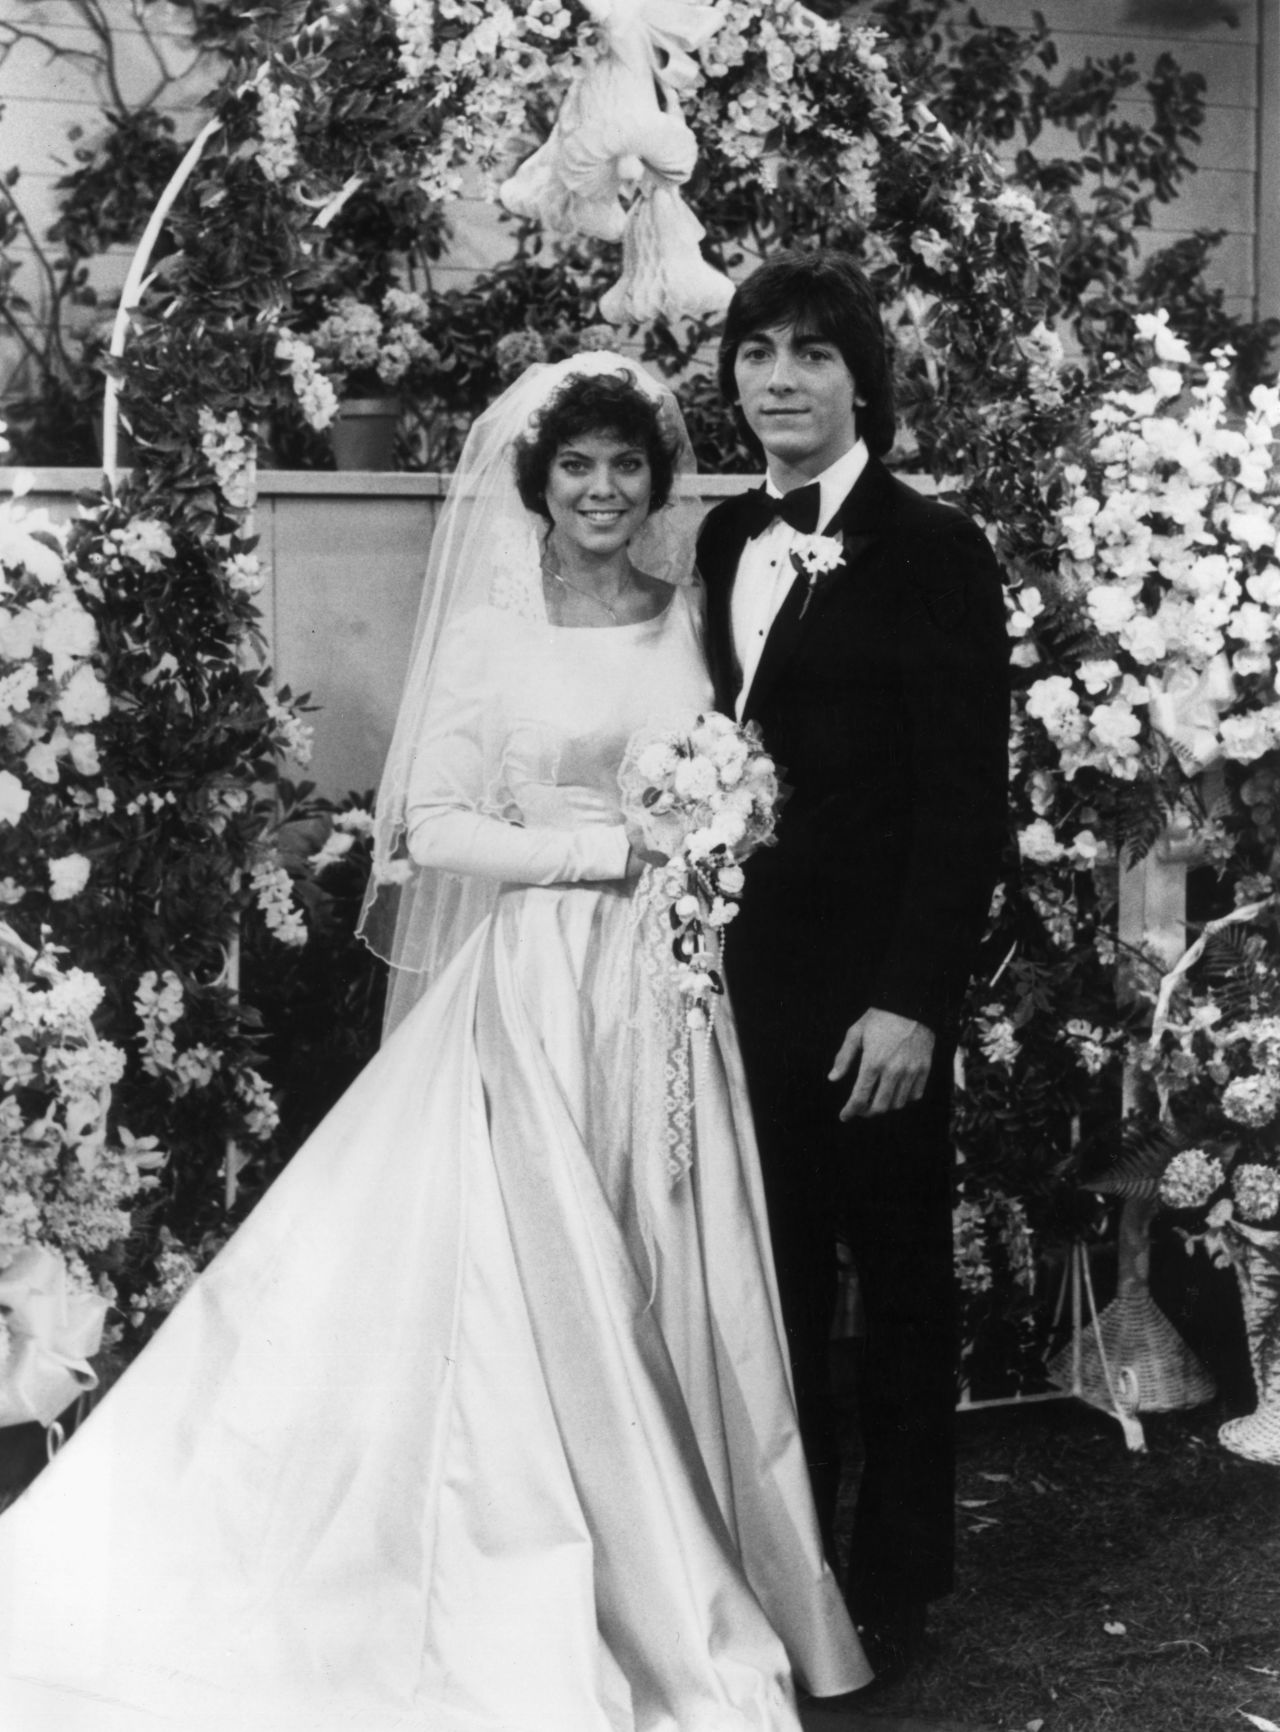 The Fonz aside, the romance between Joanie (Erin Moran) and Chachi (Scott Baio) was one of the most memorable parts of the ABC hit sitcom "Happy Days." But their spinoff, "Joanie Loves Chachi," was decidedly less successful.